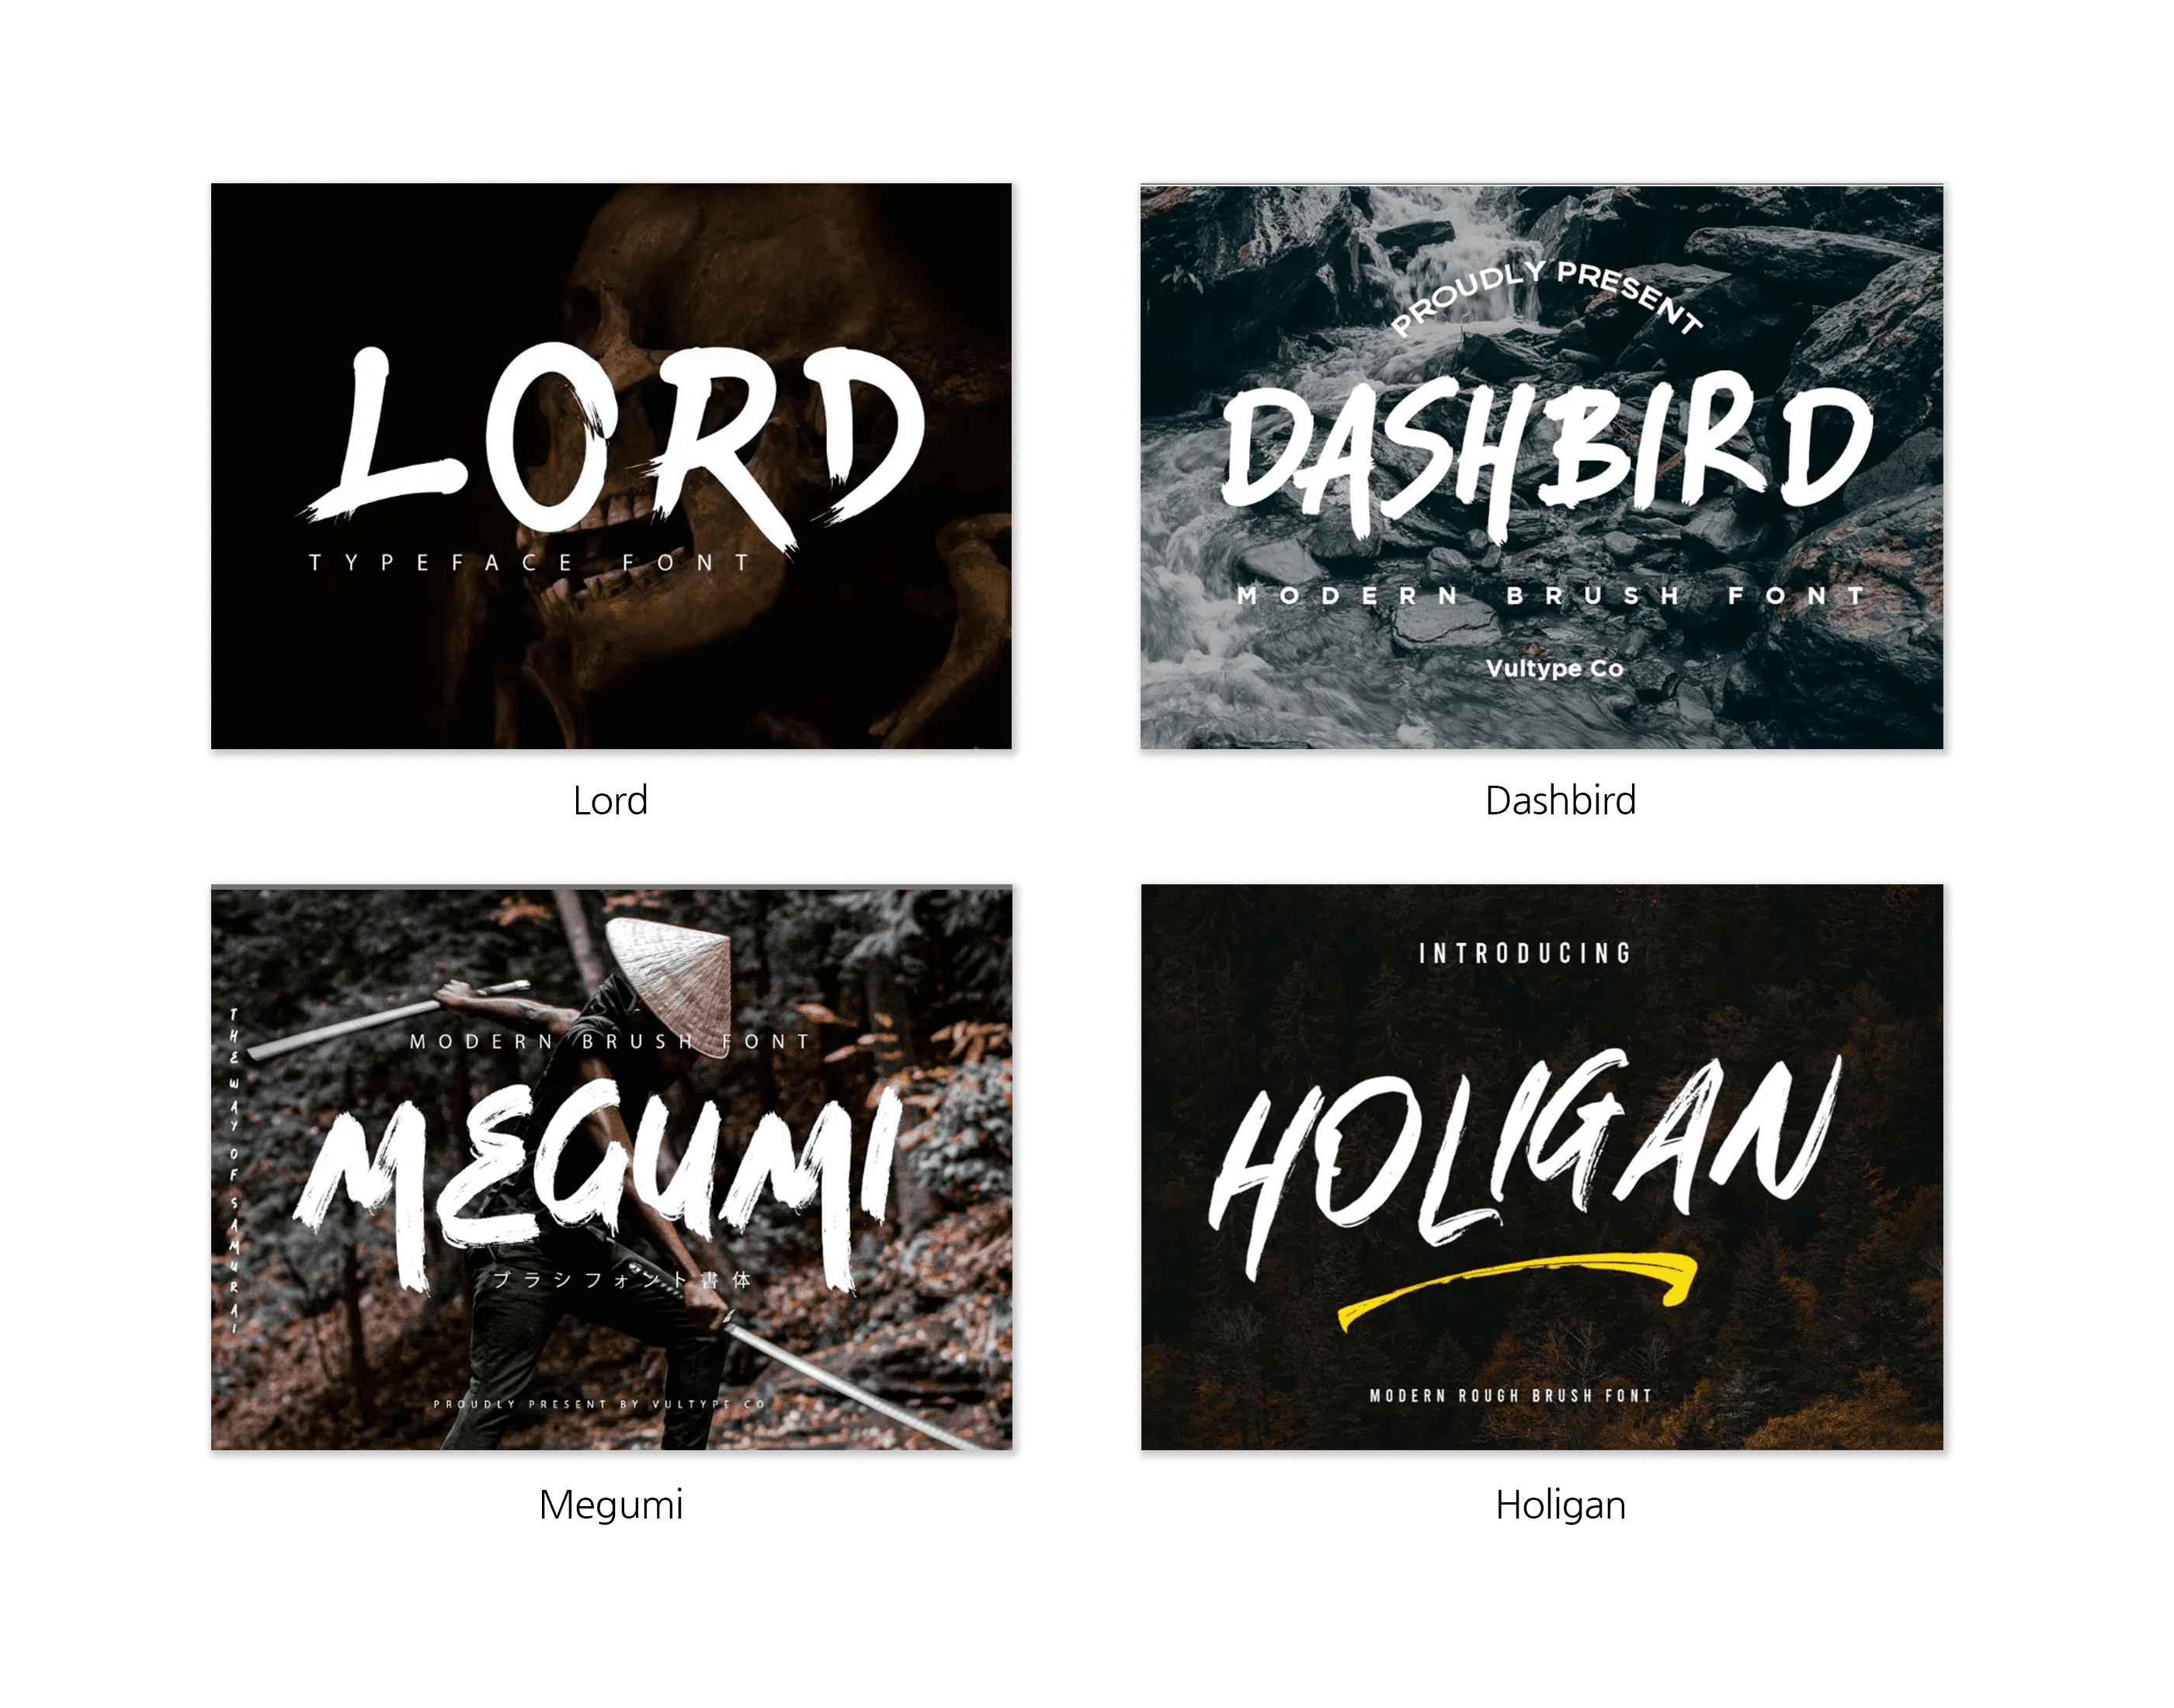 2024-font-trend-casual-brush-fonts-lord-font-and-dashbird-font-and-megumi-font-and-holigan-font